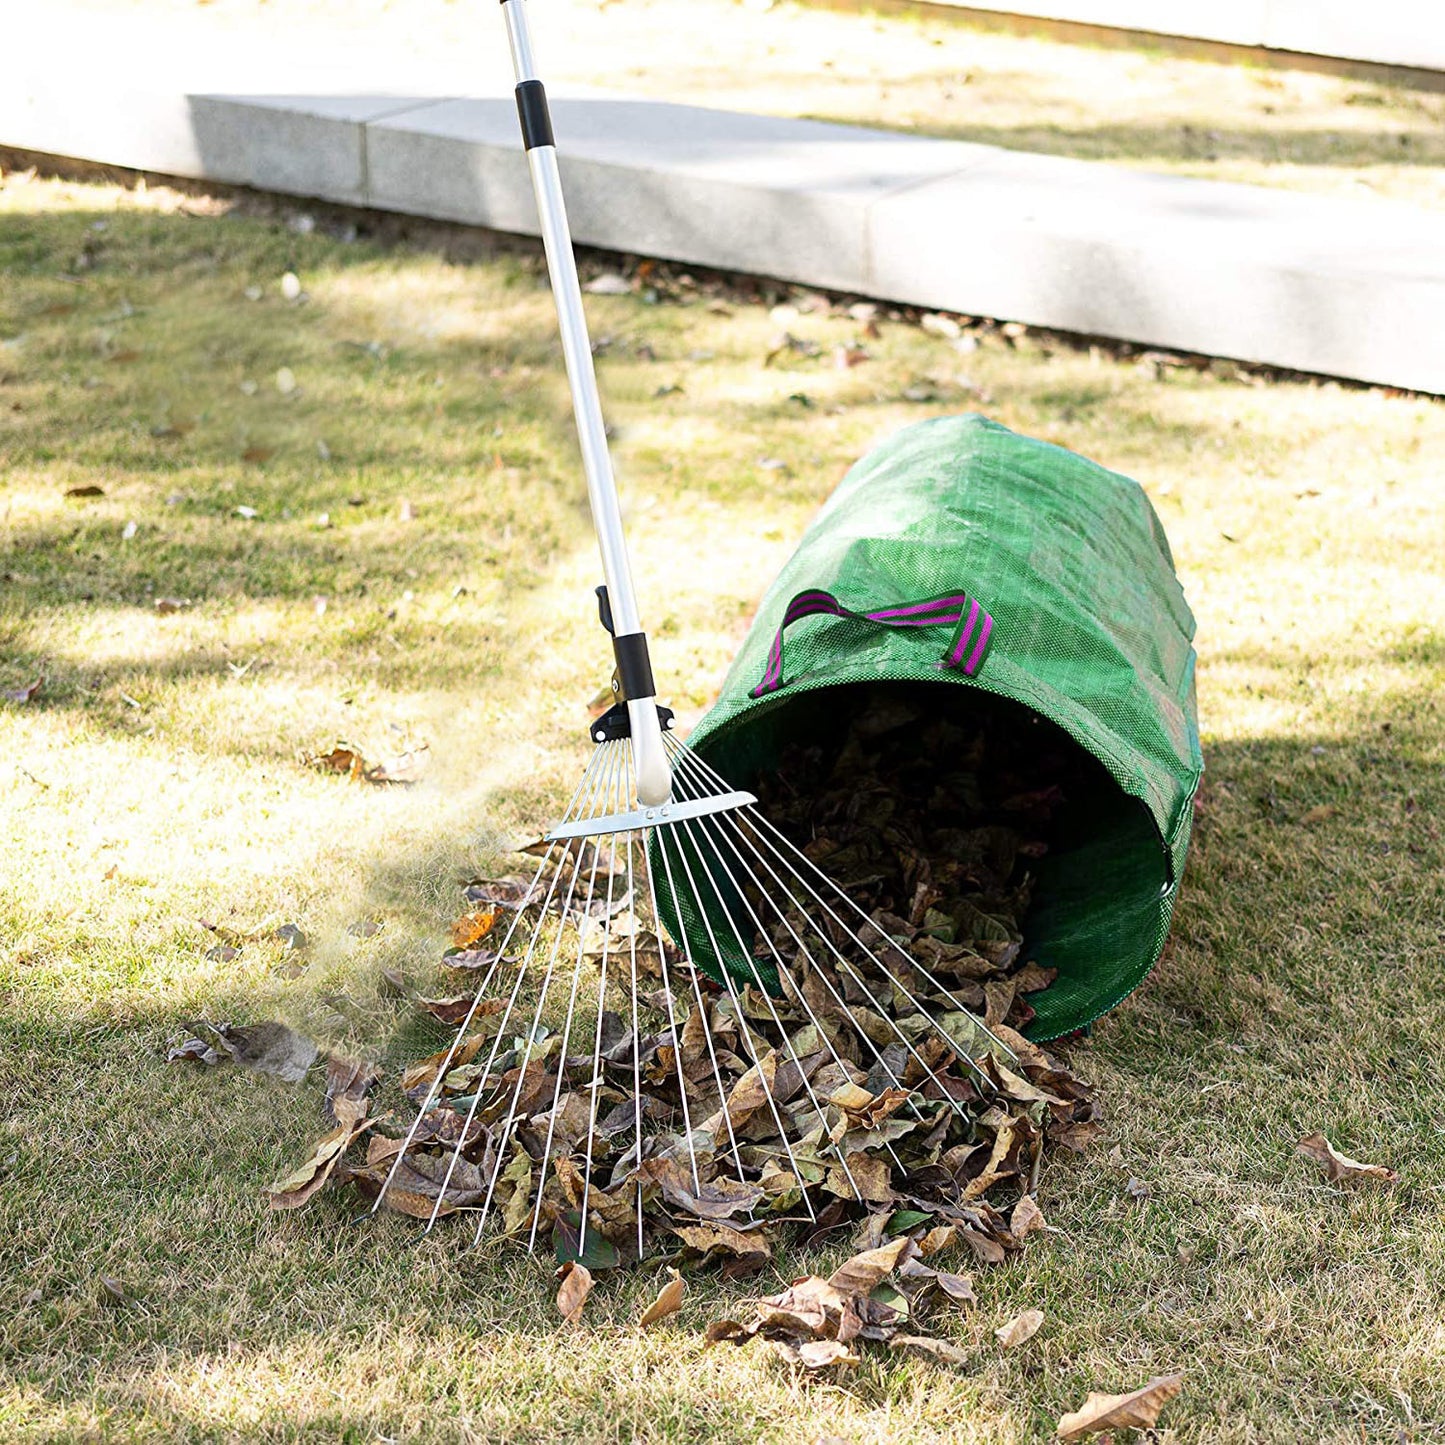 Expanding Stainless Steel Rake For Quick Clean Lawn Yard Garden